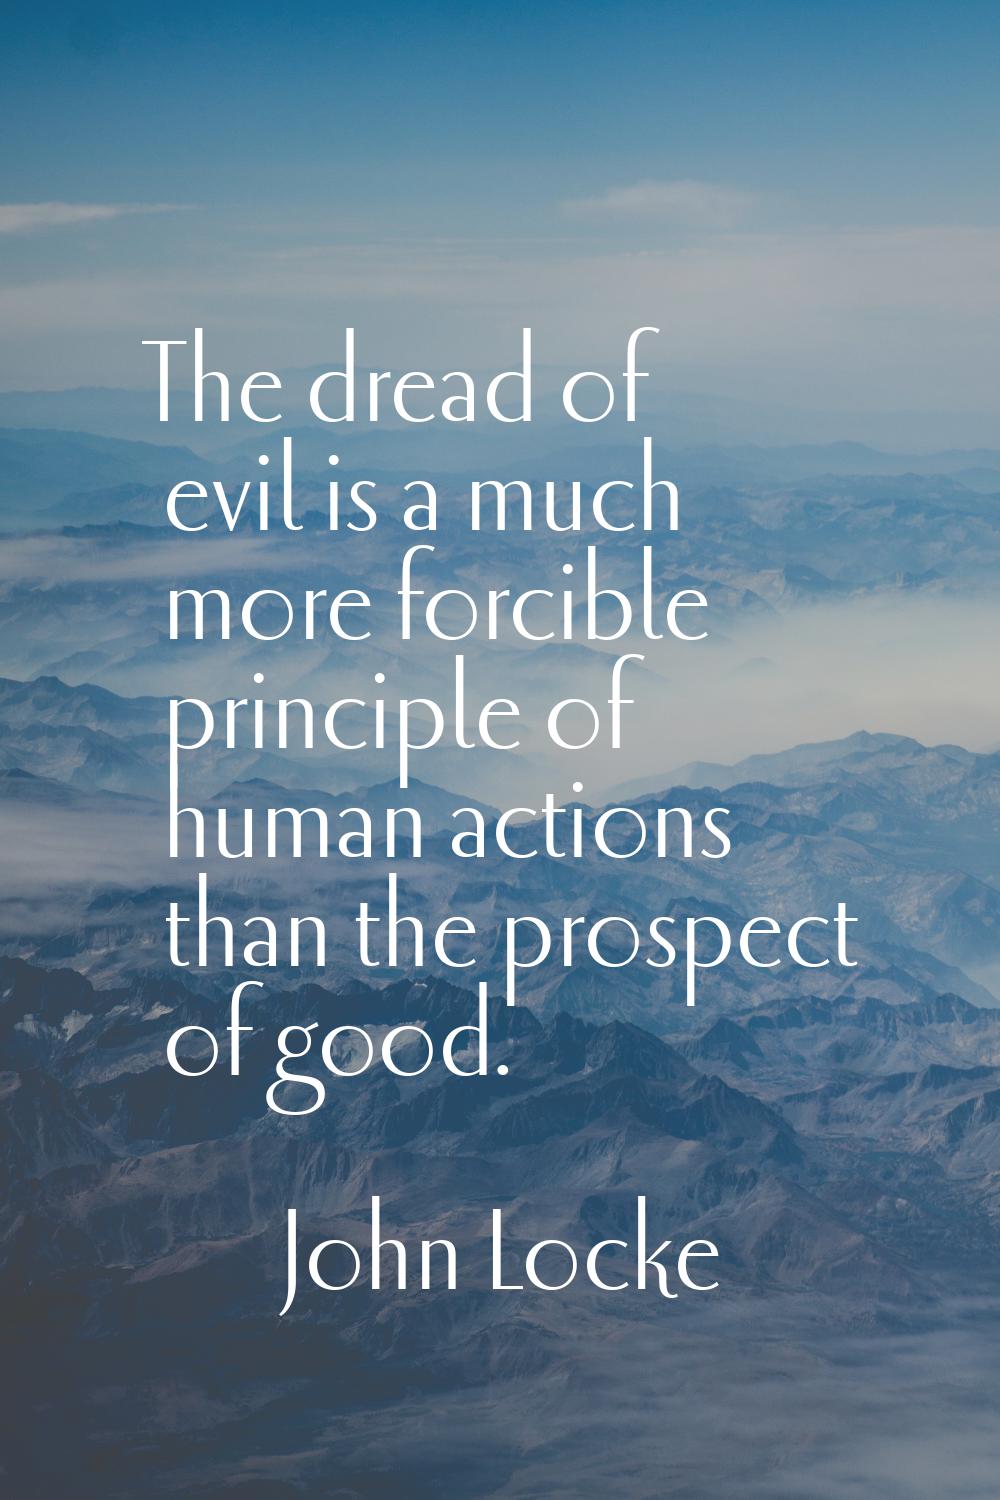 The dread of evil is a much more forcible principle of human actions than the prospect of good.